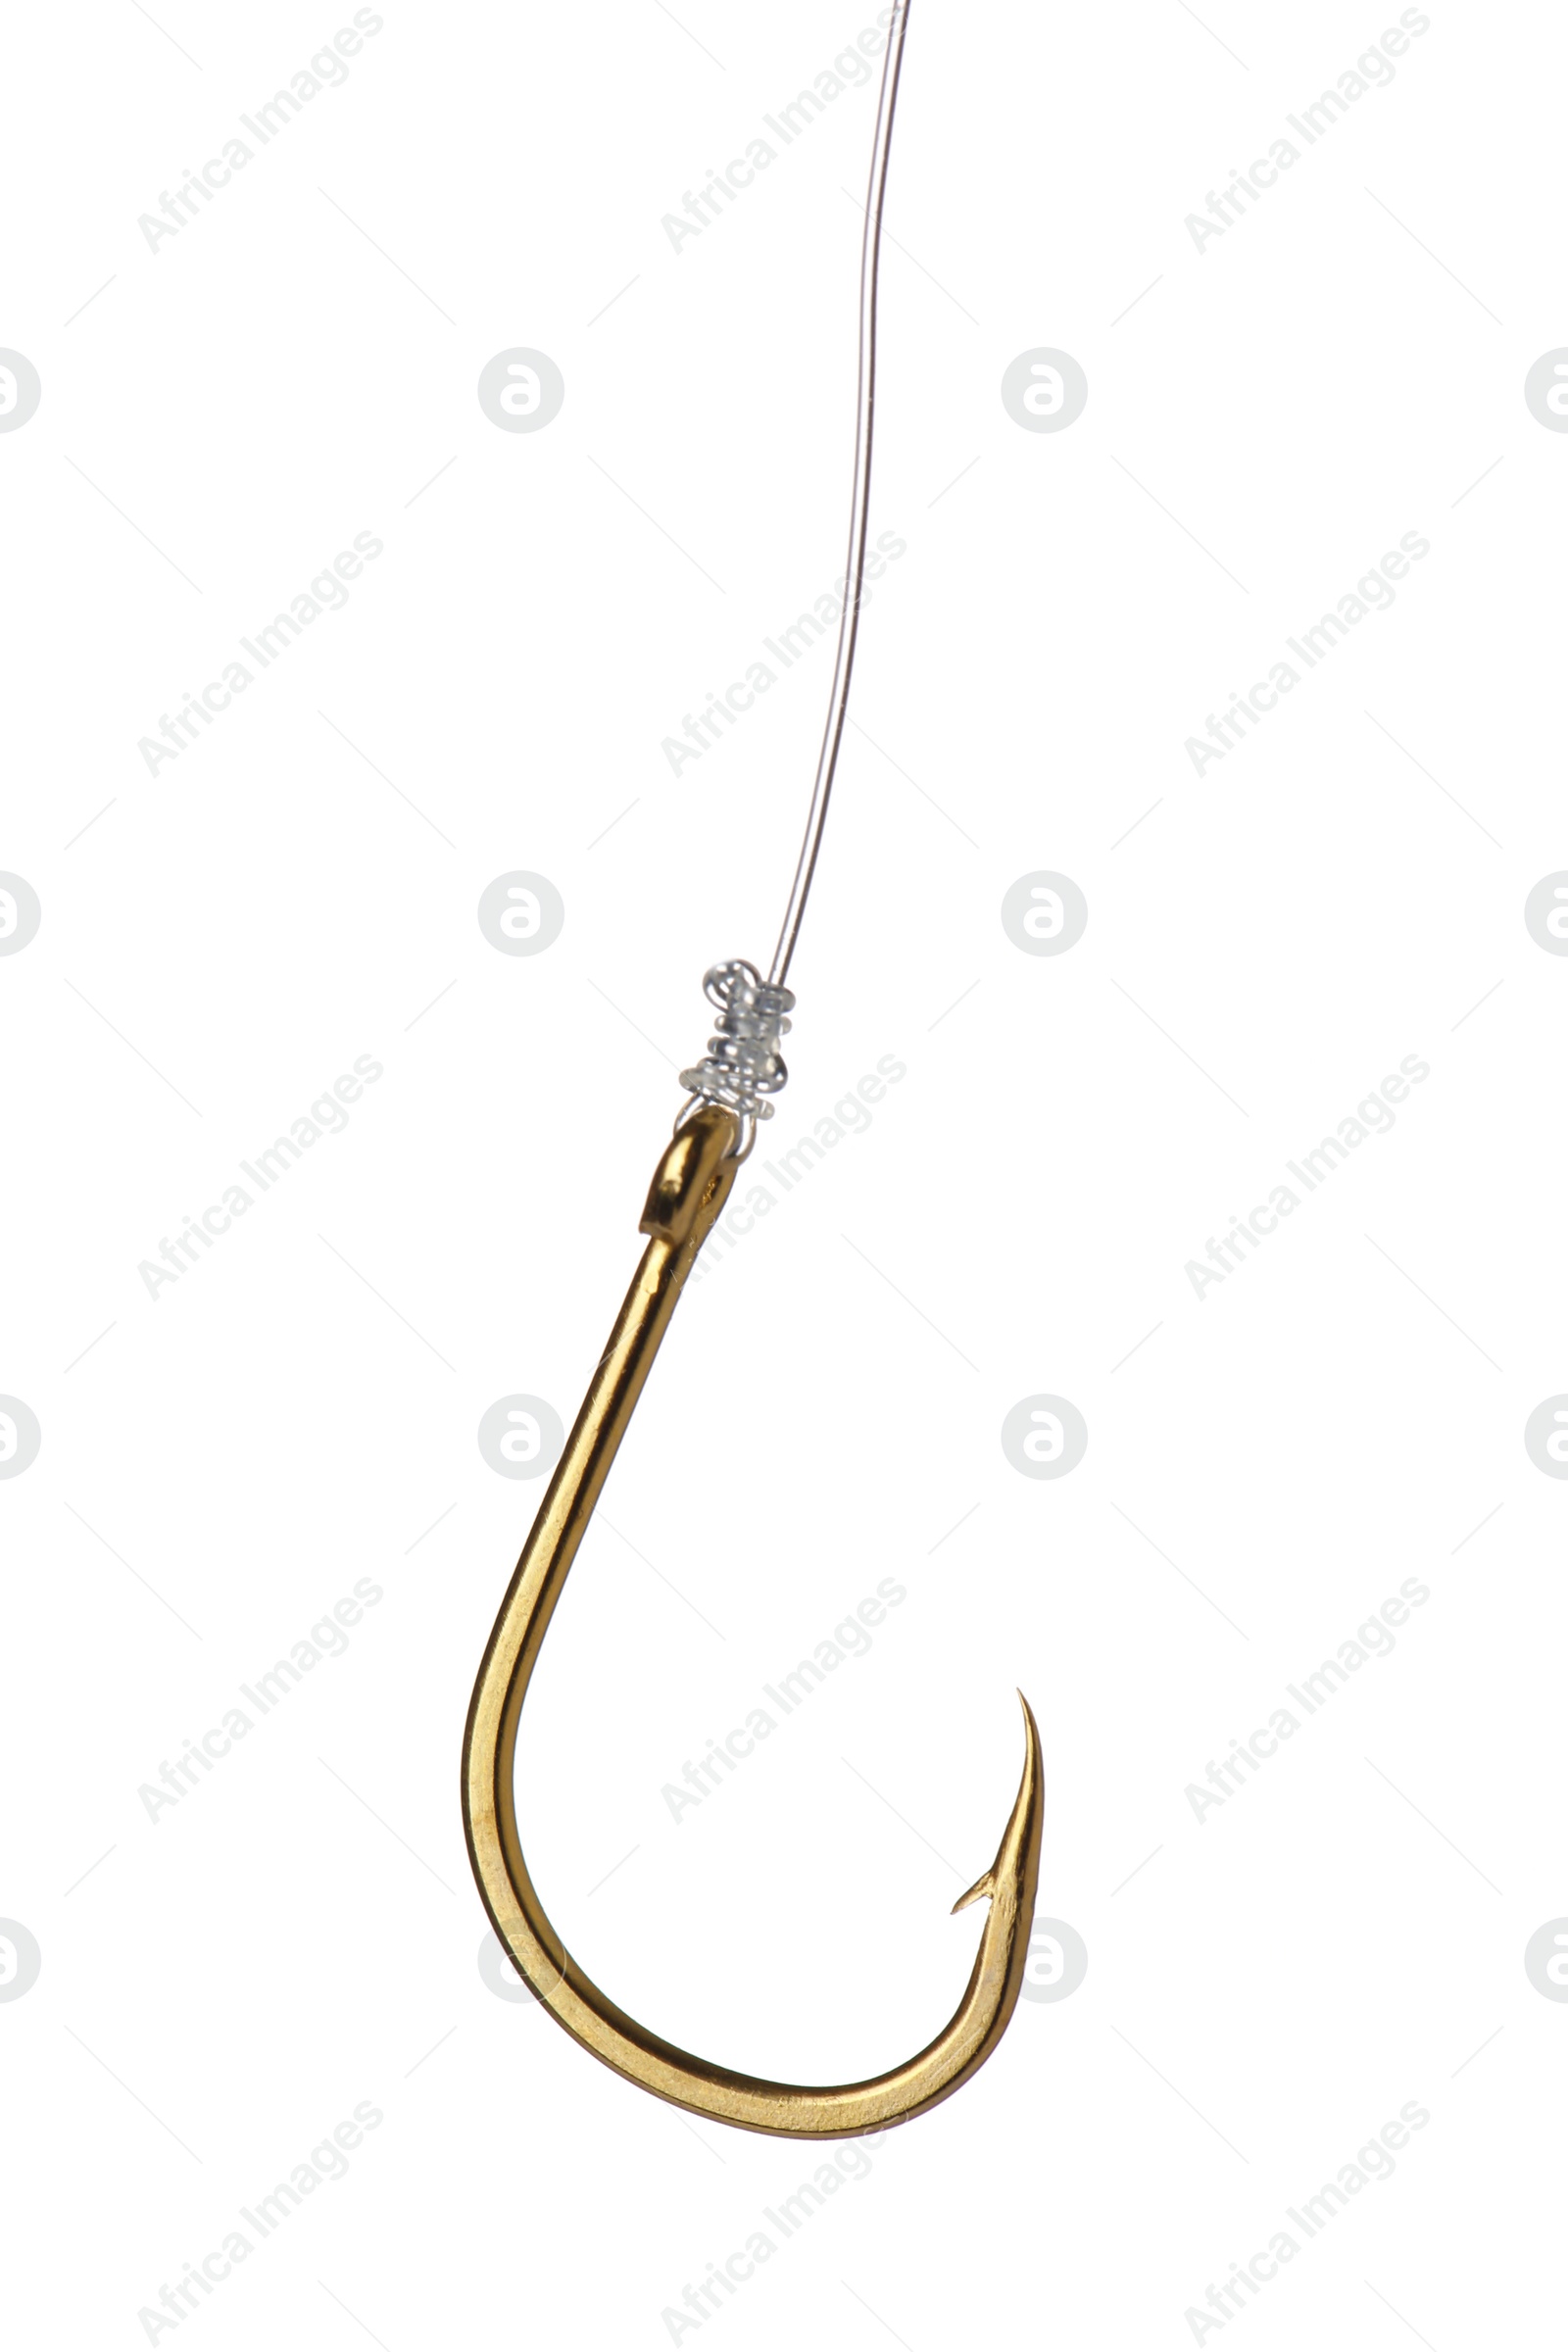 Photo of Fishing hook on white background. Angling equipment